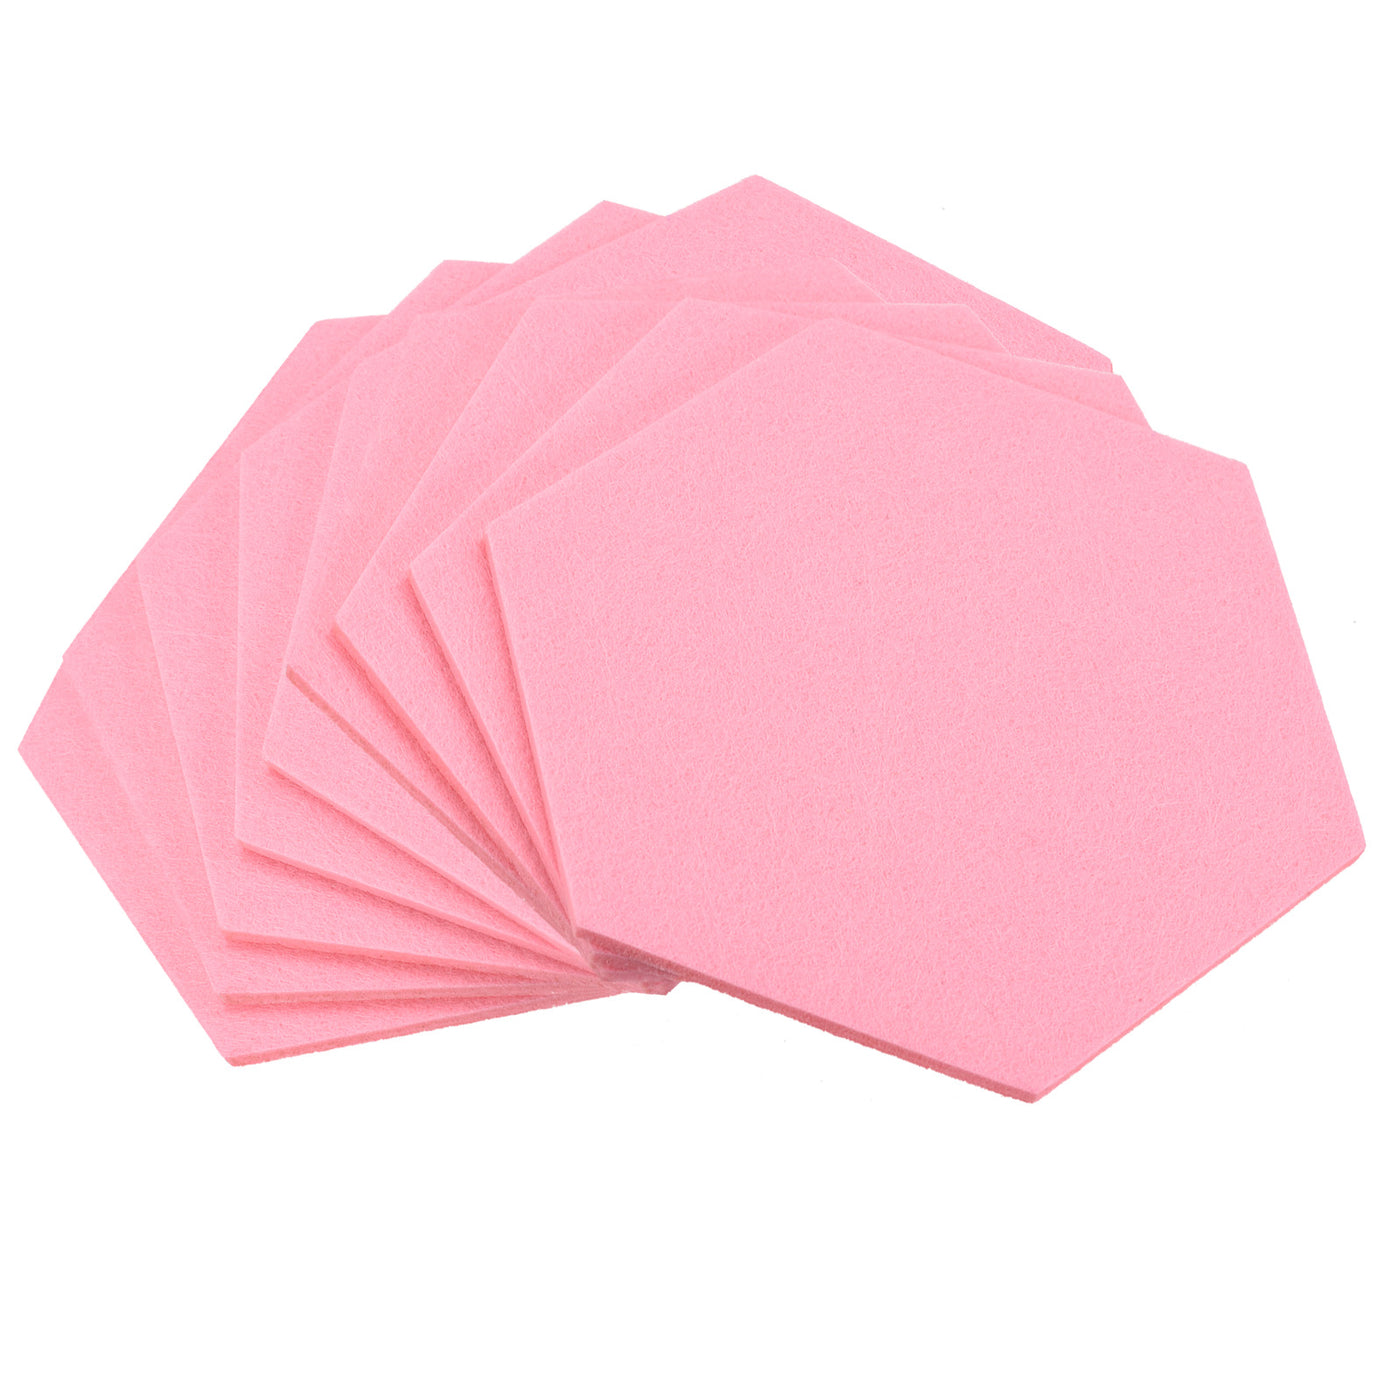 uxcell Uxcell Felt Coasters 9pcs Absorbent Pad Coaster for Drink Cup Pot Bowl Vase Pink